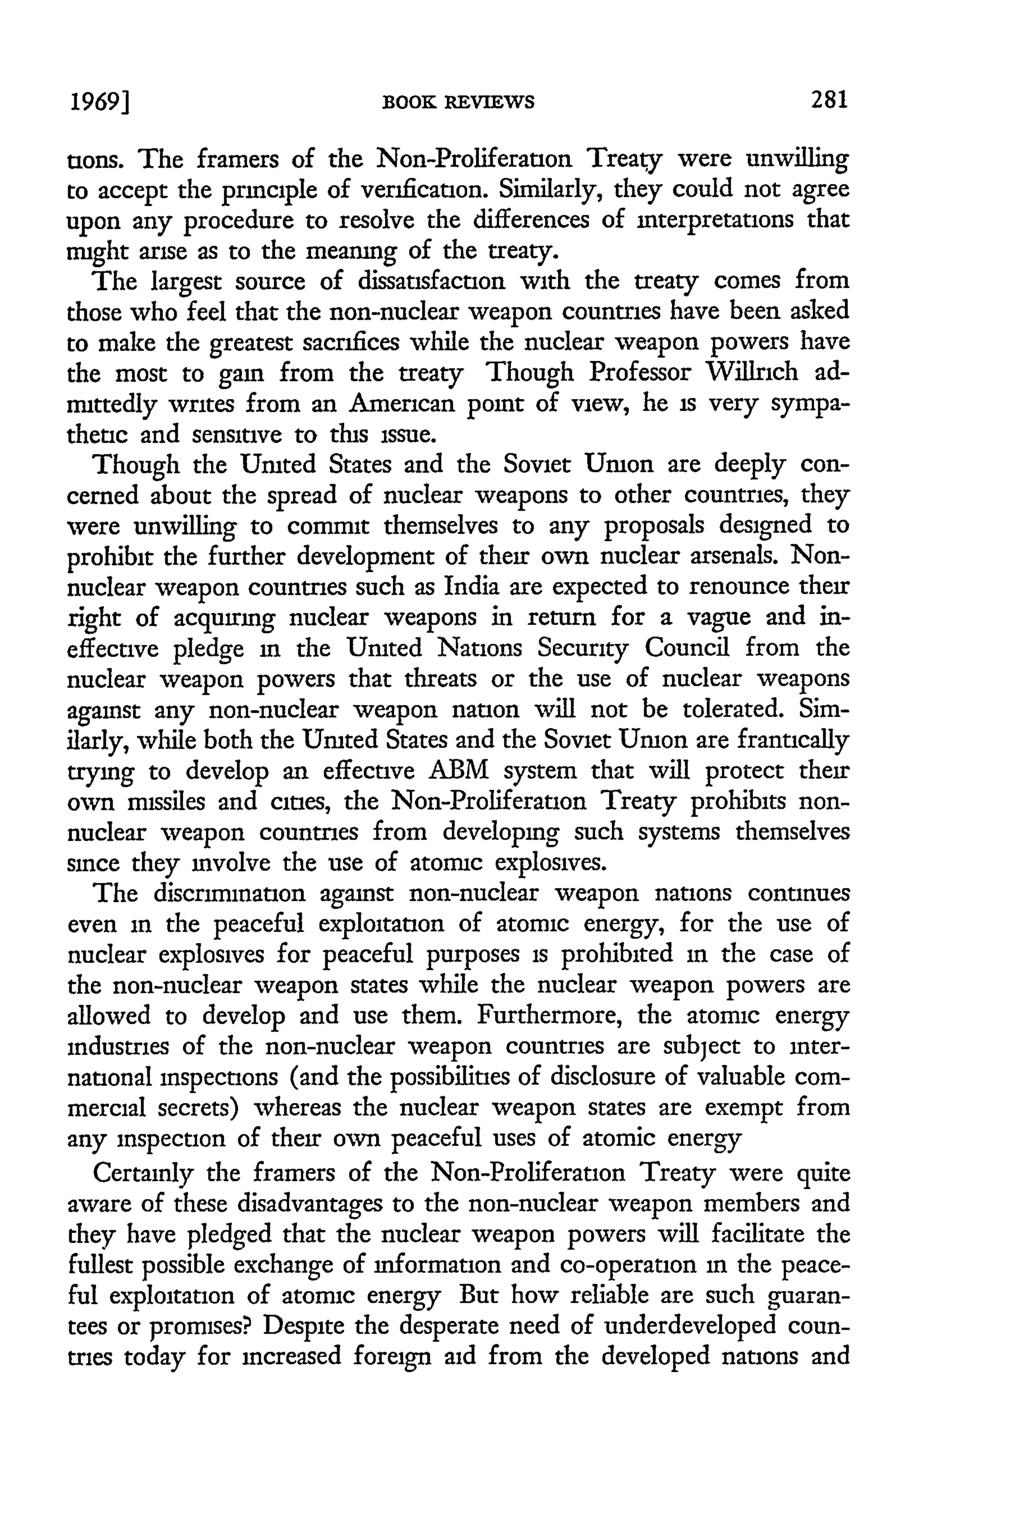 1969] BOOK REVIEWS nons. The framers of the Non-Proliferation Treaty were unwilling to accept the principle of verification.